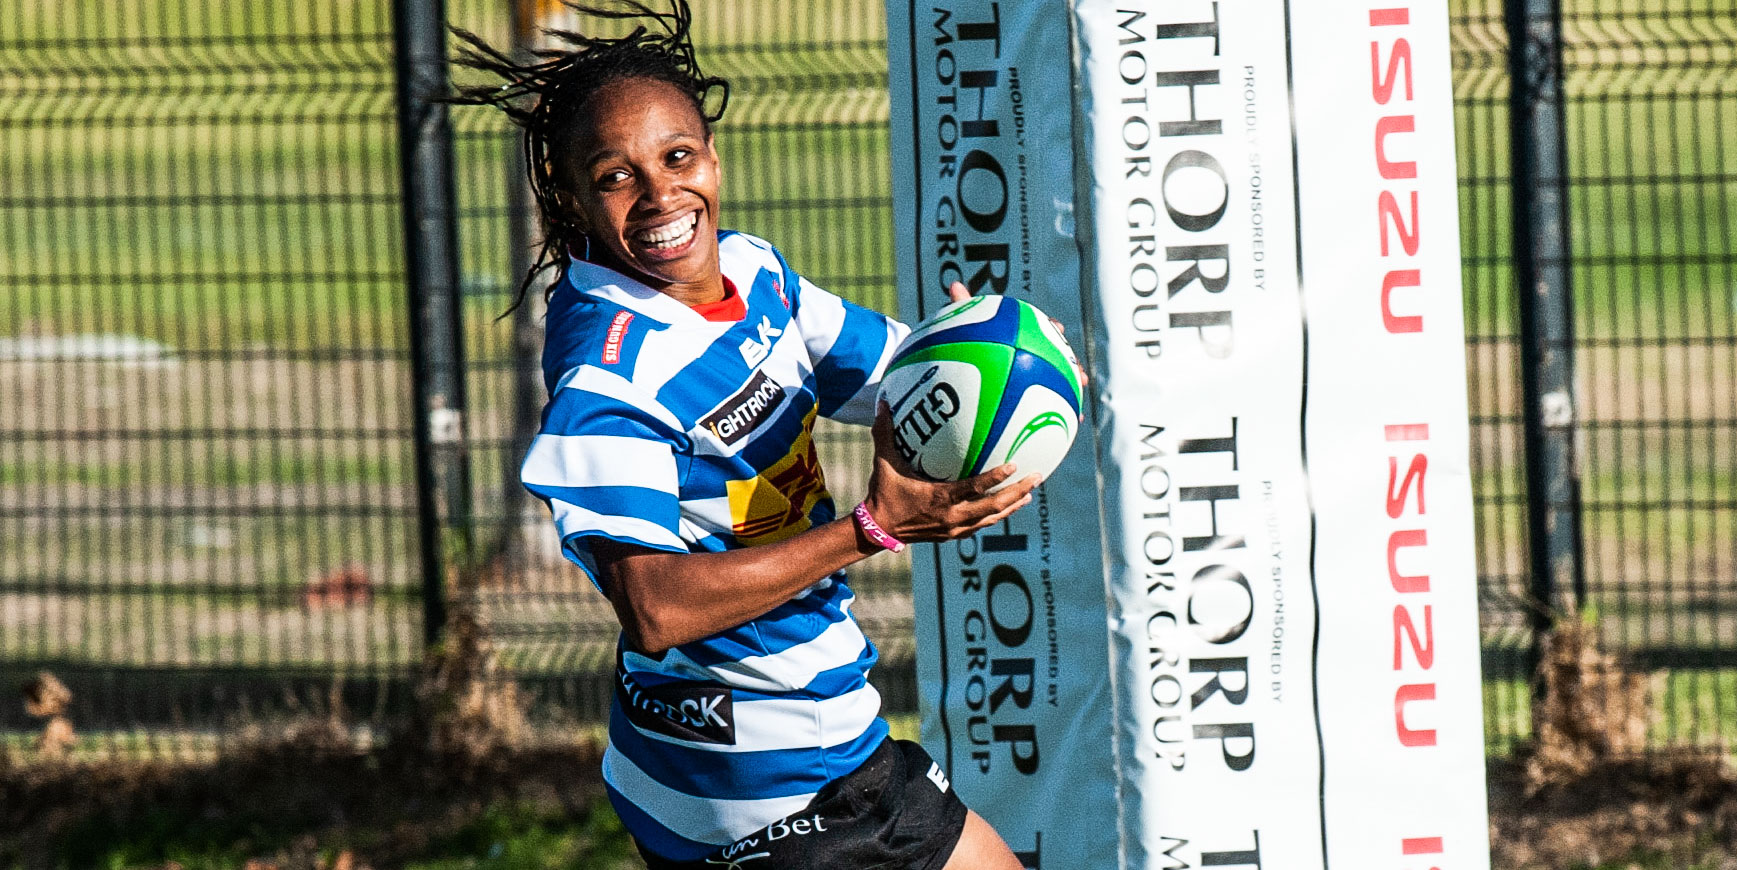 Felicia Jacobs scored twice for DHL WP on Friday.